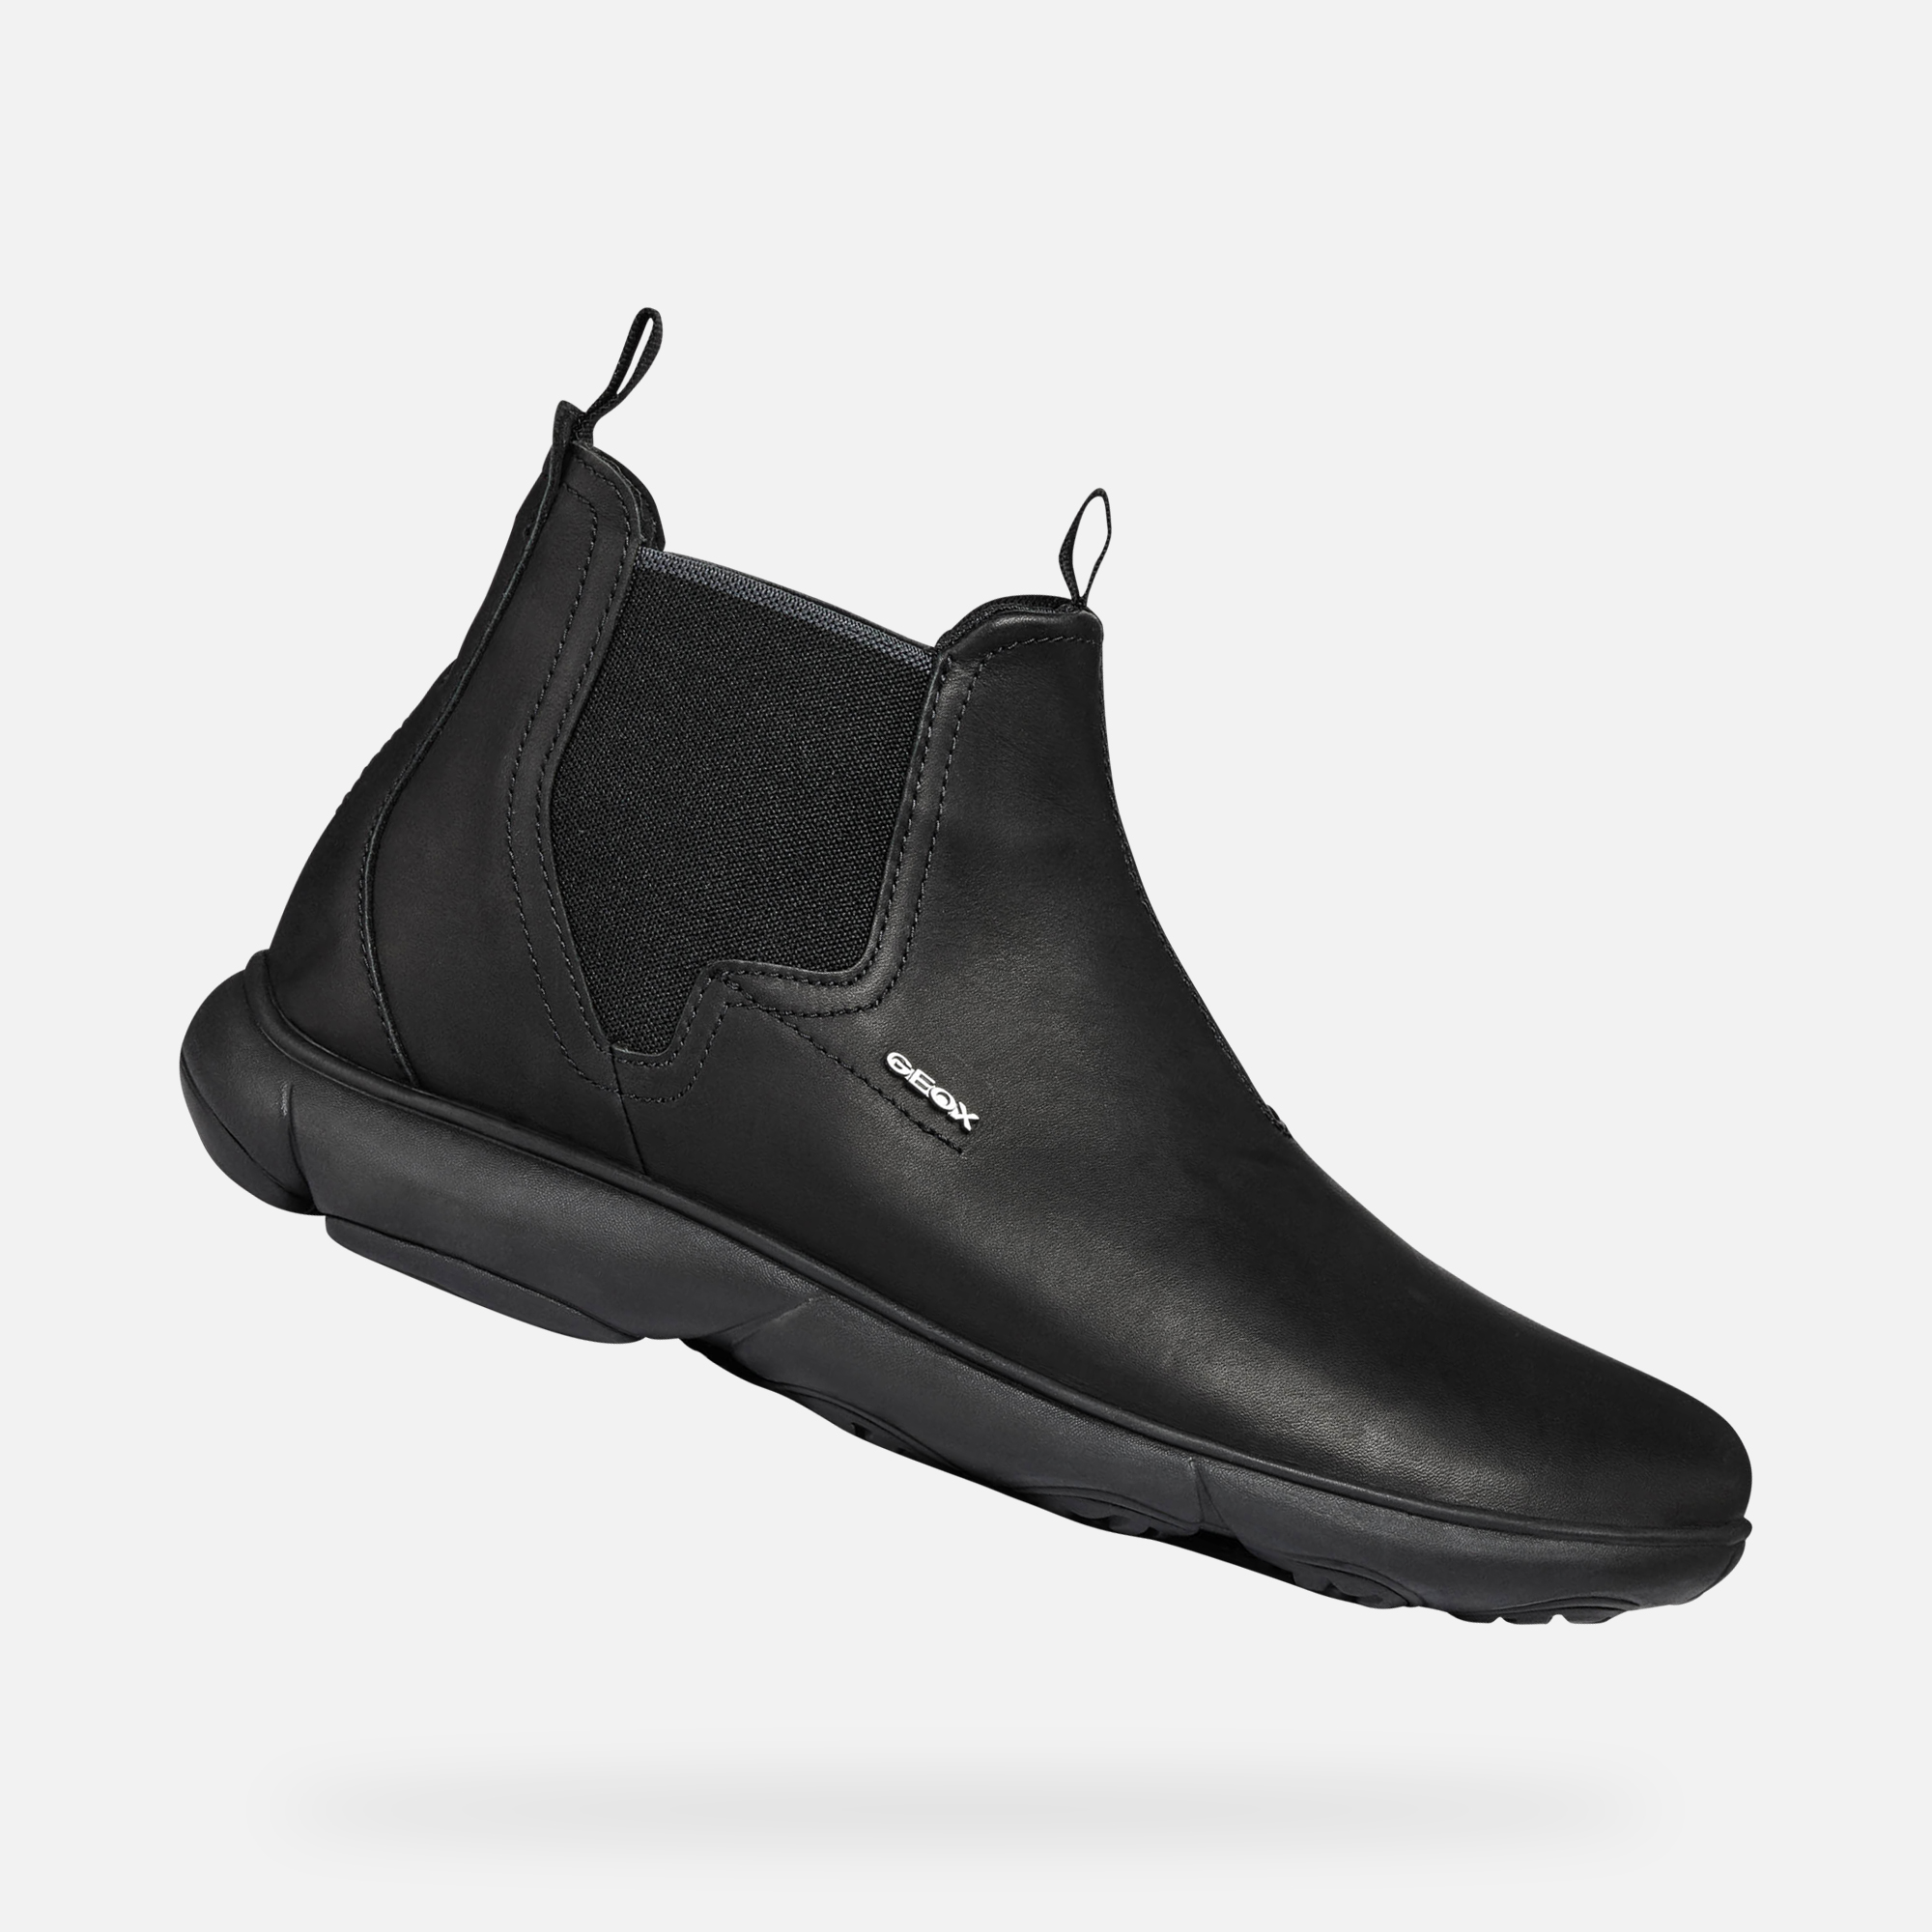 Geox NEBULA Men's Ankle Boots Black | Geox¨ Official Store